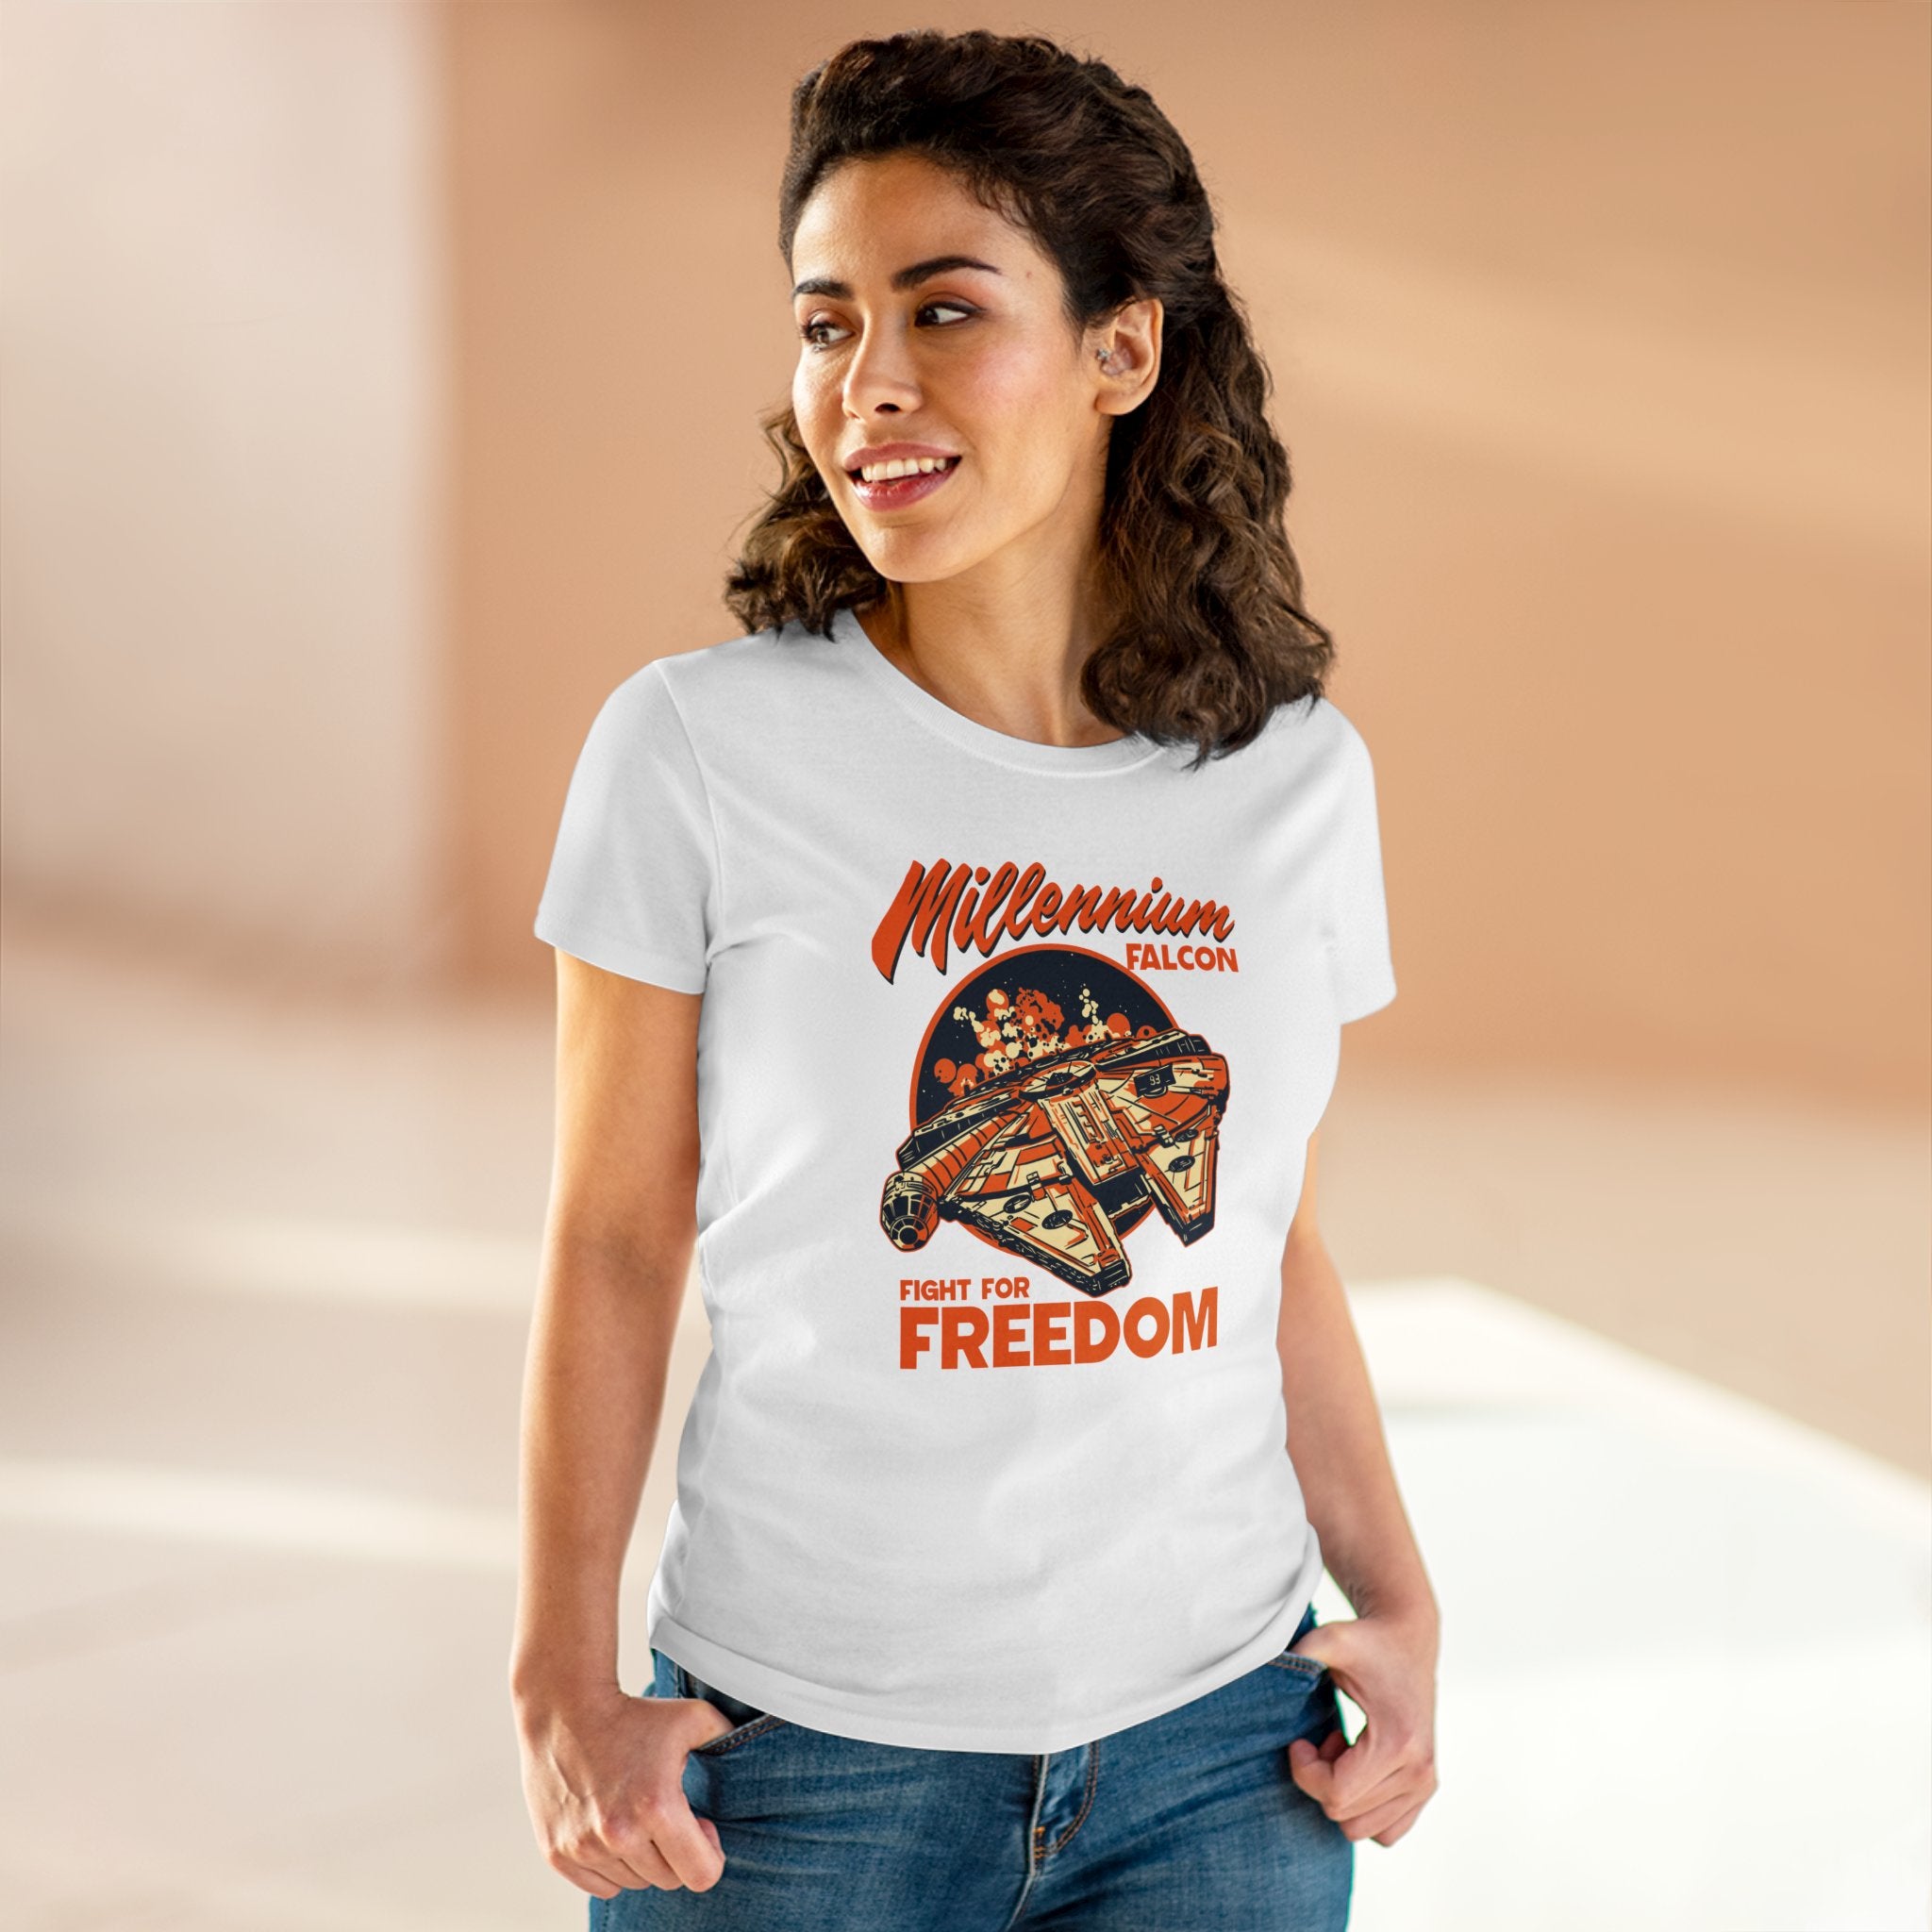 A woman is wearing a white Falcon - Women's Tee made from soft pre-shrunk cotton with a graphic of the Millennium Falcon and text that reads, "Fight for Freedom." She is posing, looking off to the side, with one hand in her pocket.